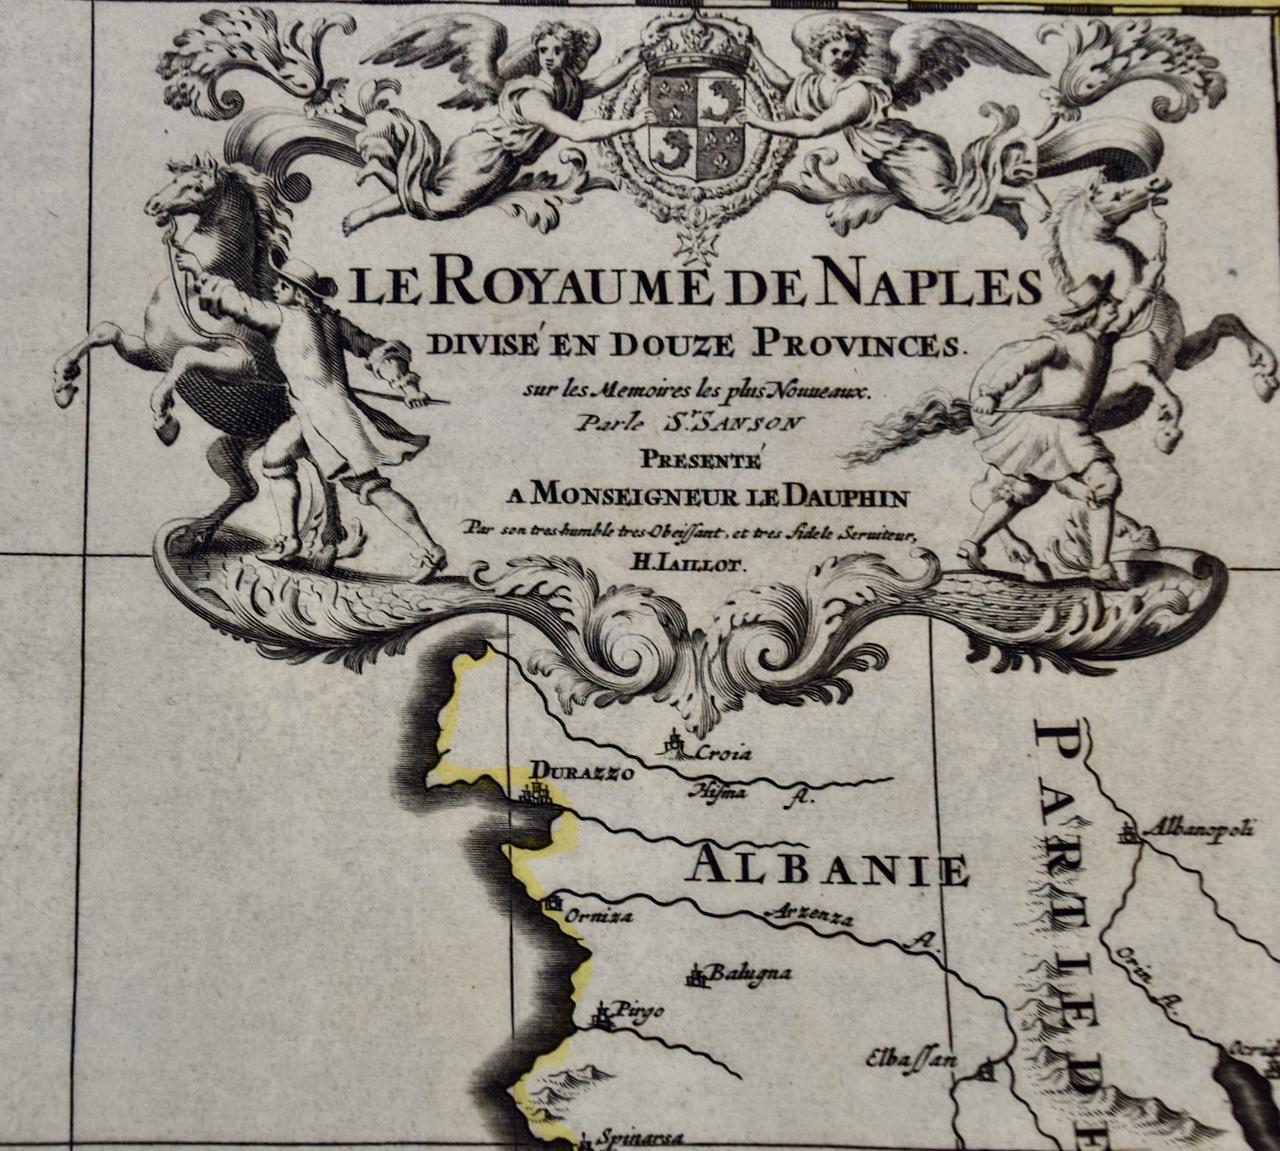 Naples and S. Italy: A Large 17th C. Hand-colored Map by Sanson and Jaillot - Print by Nicholas Sanson d'Abbeville